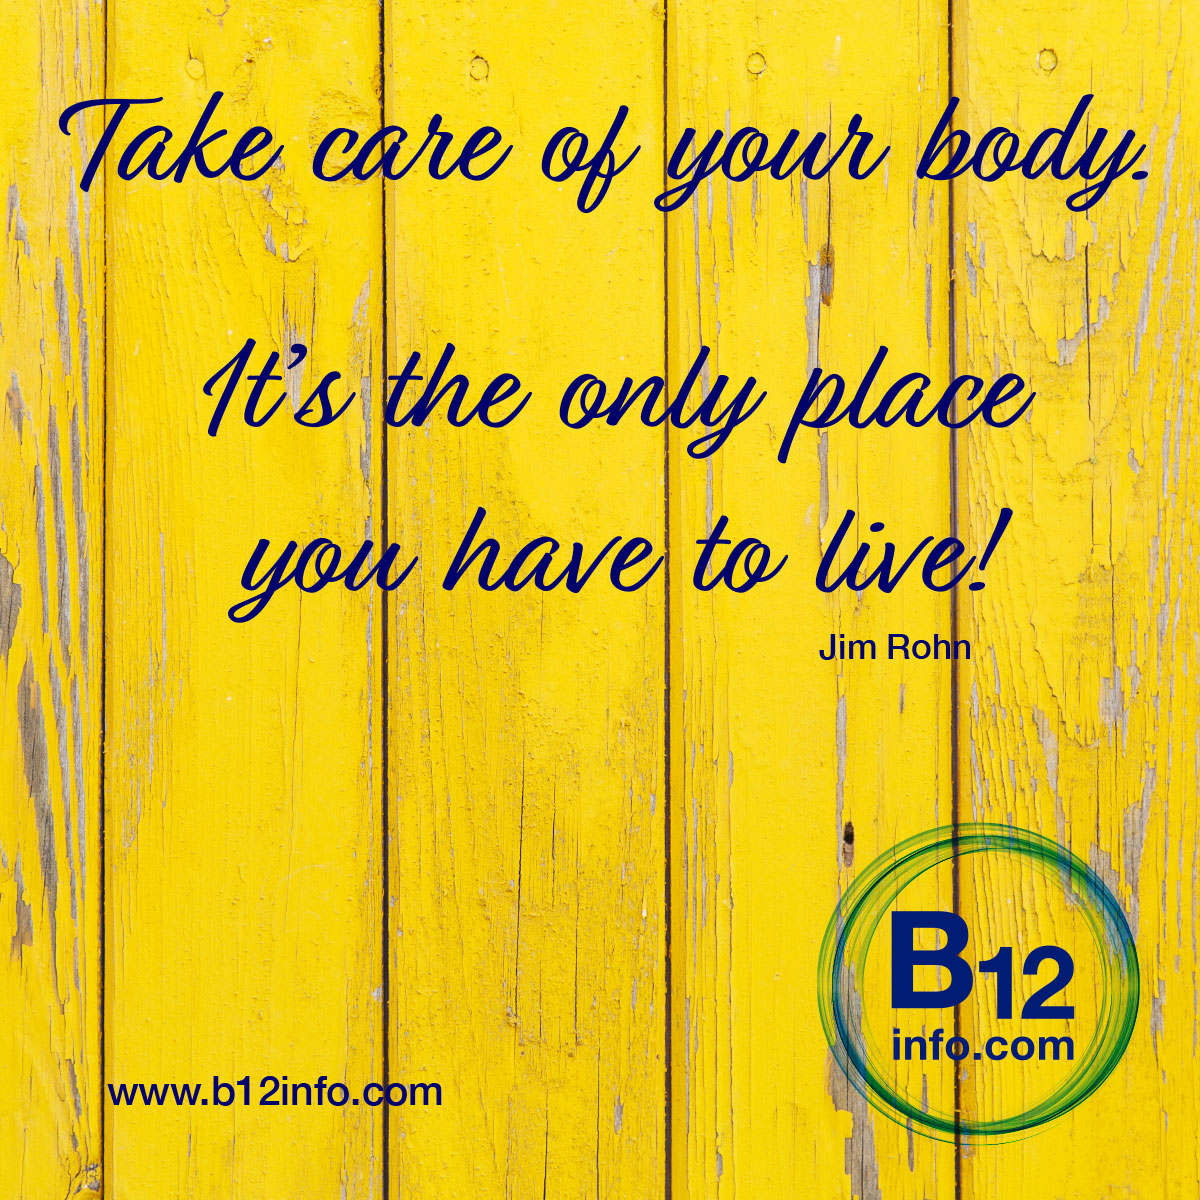 Take care of your body, it’s the only place you have to live…